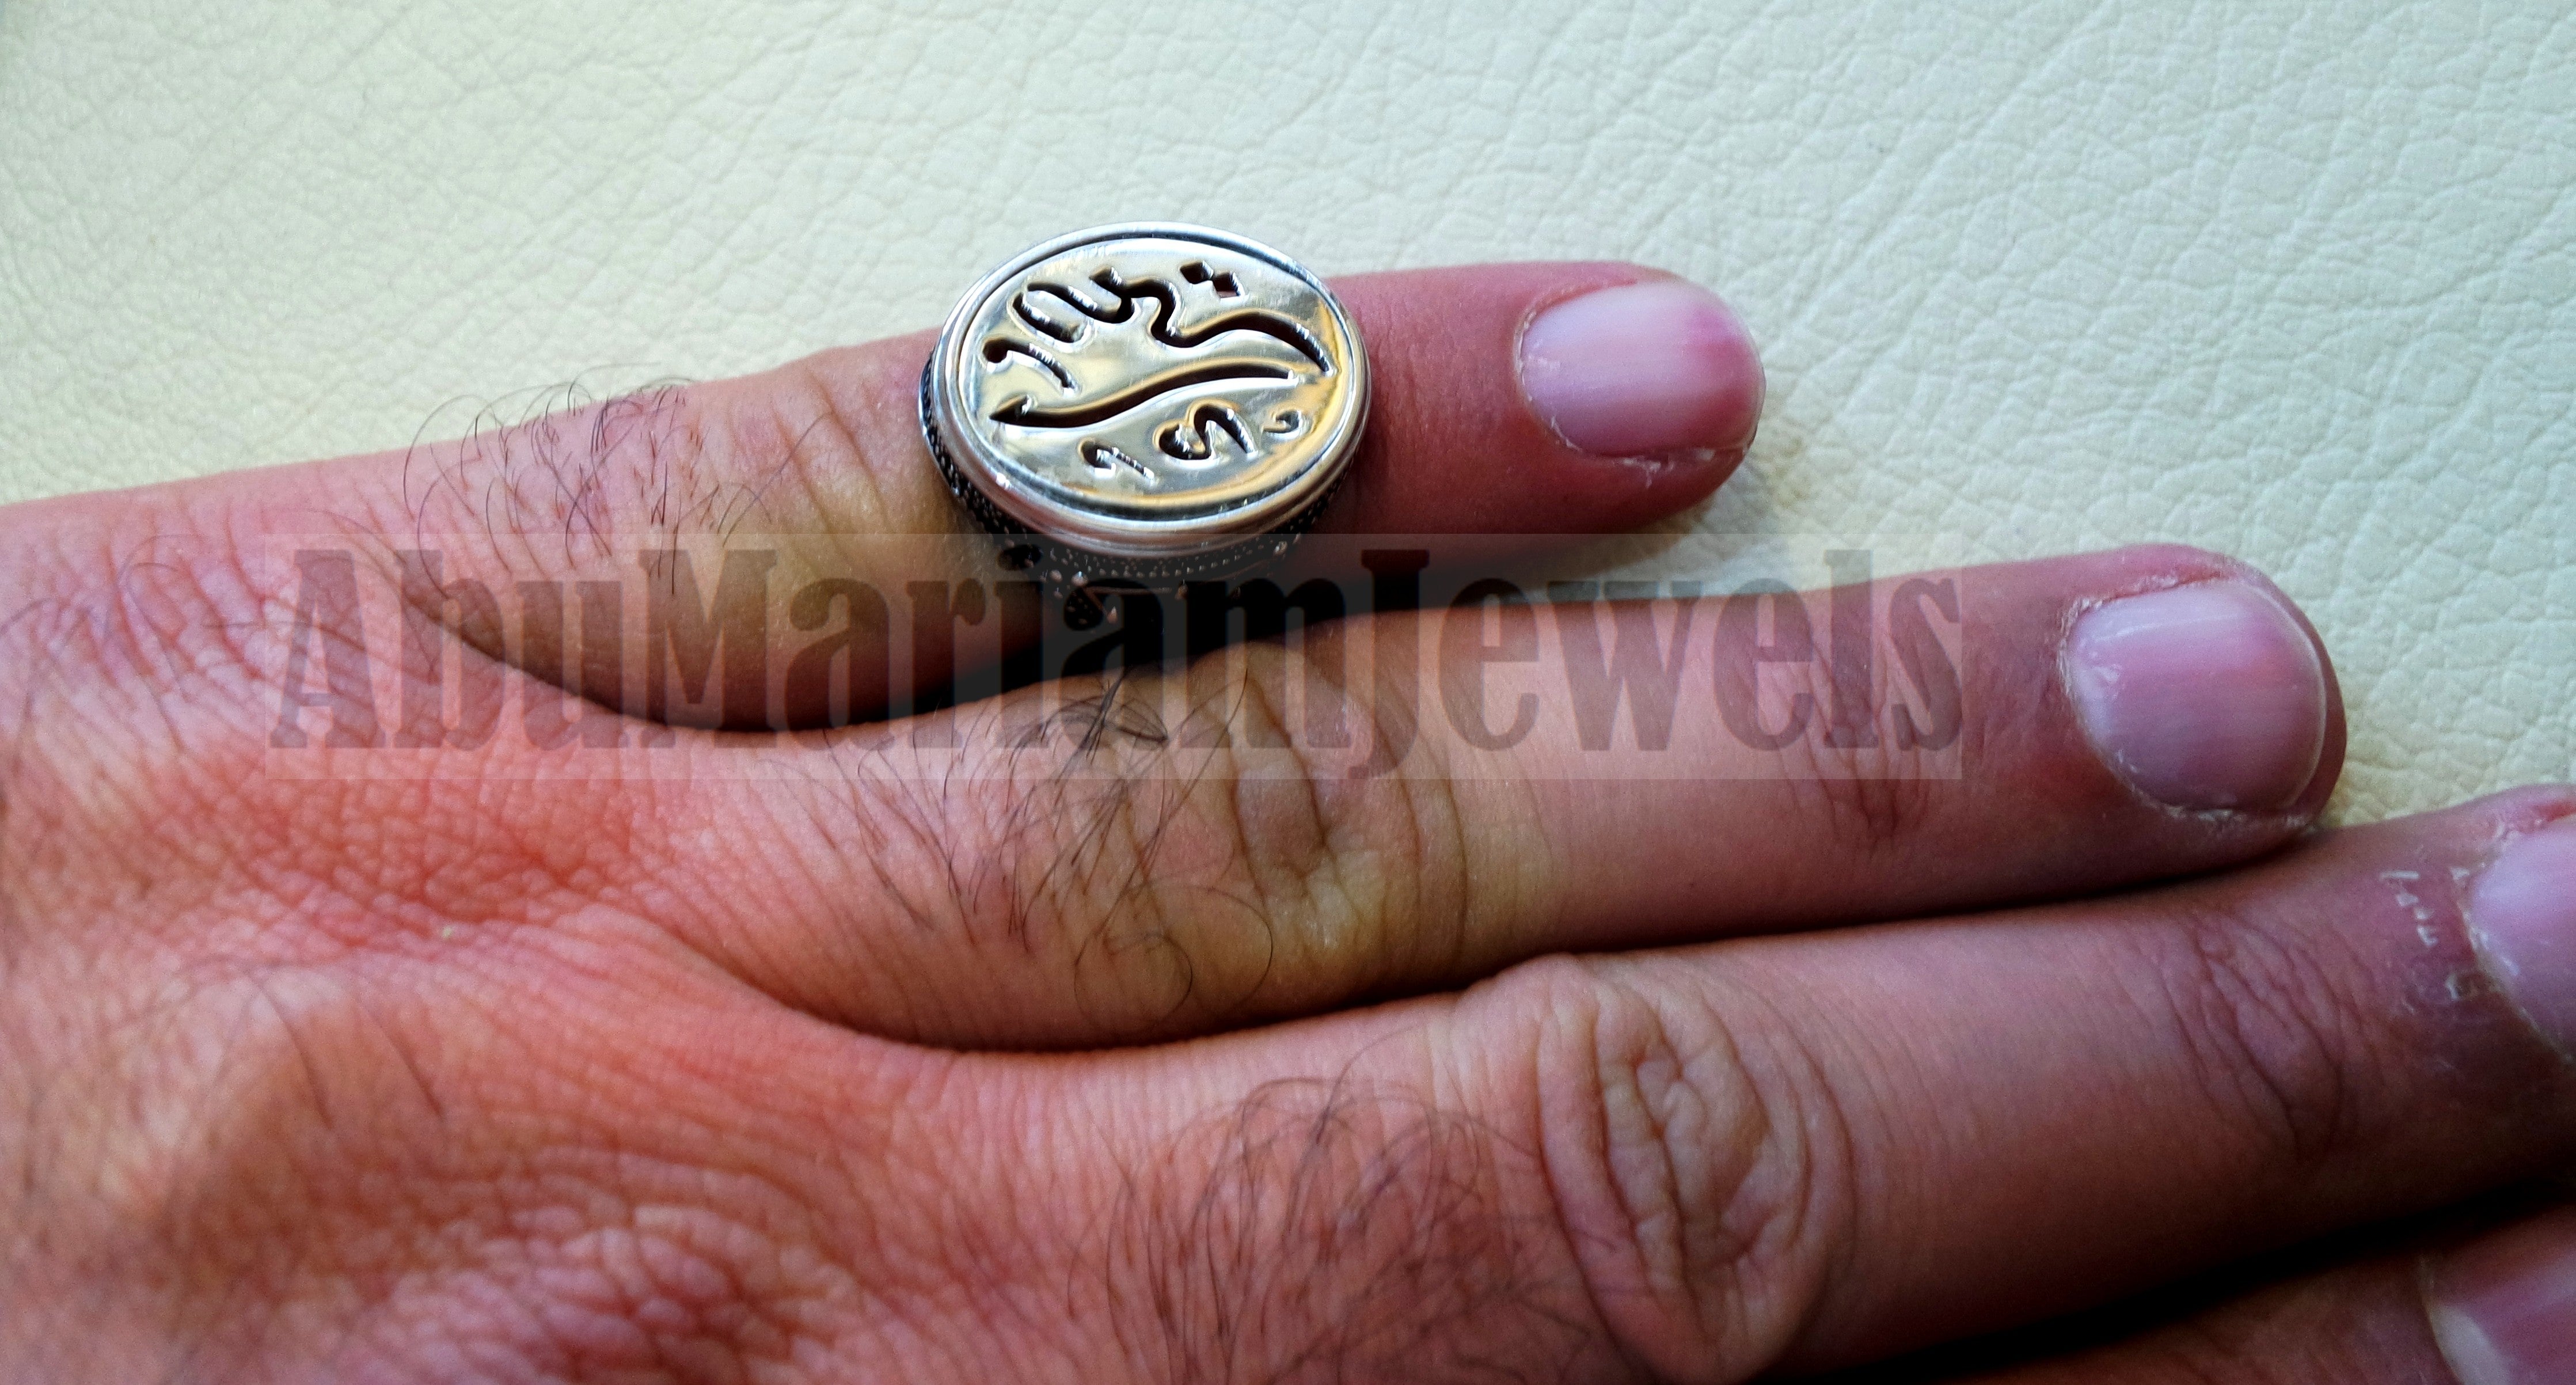 Customized Arabic calligraphy names handmade ring personalized antique jewelry style sterling silver 925 any size TSN1010 خاتم اسم تفصيل